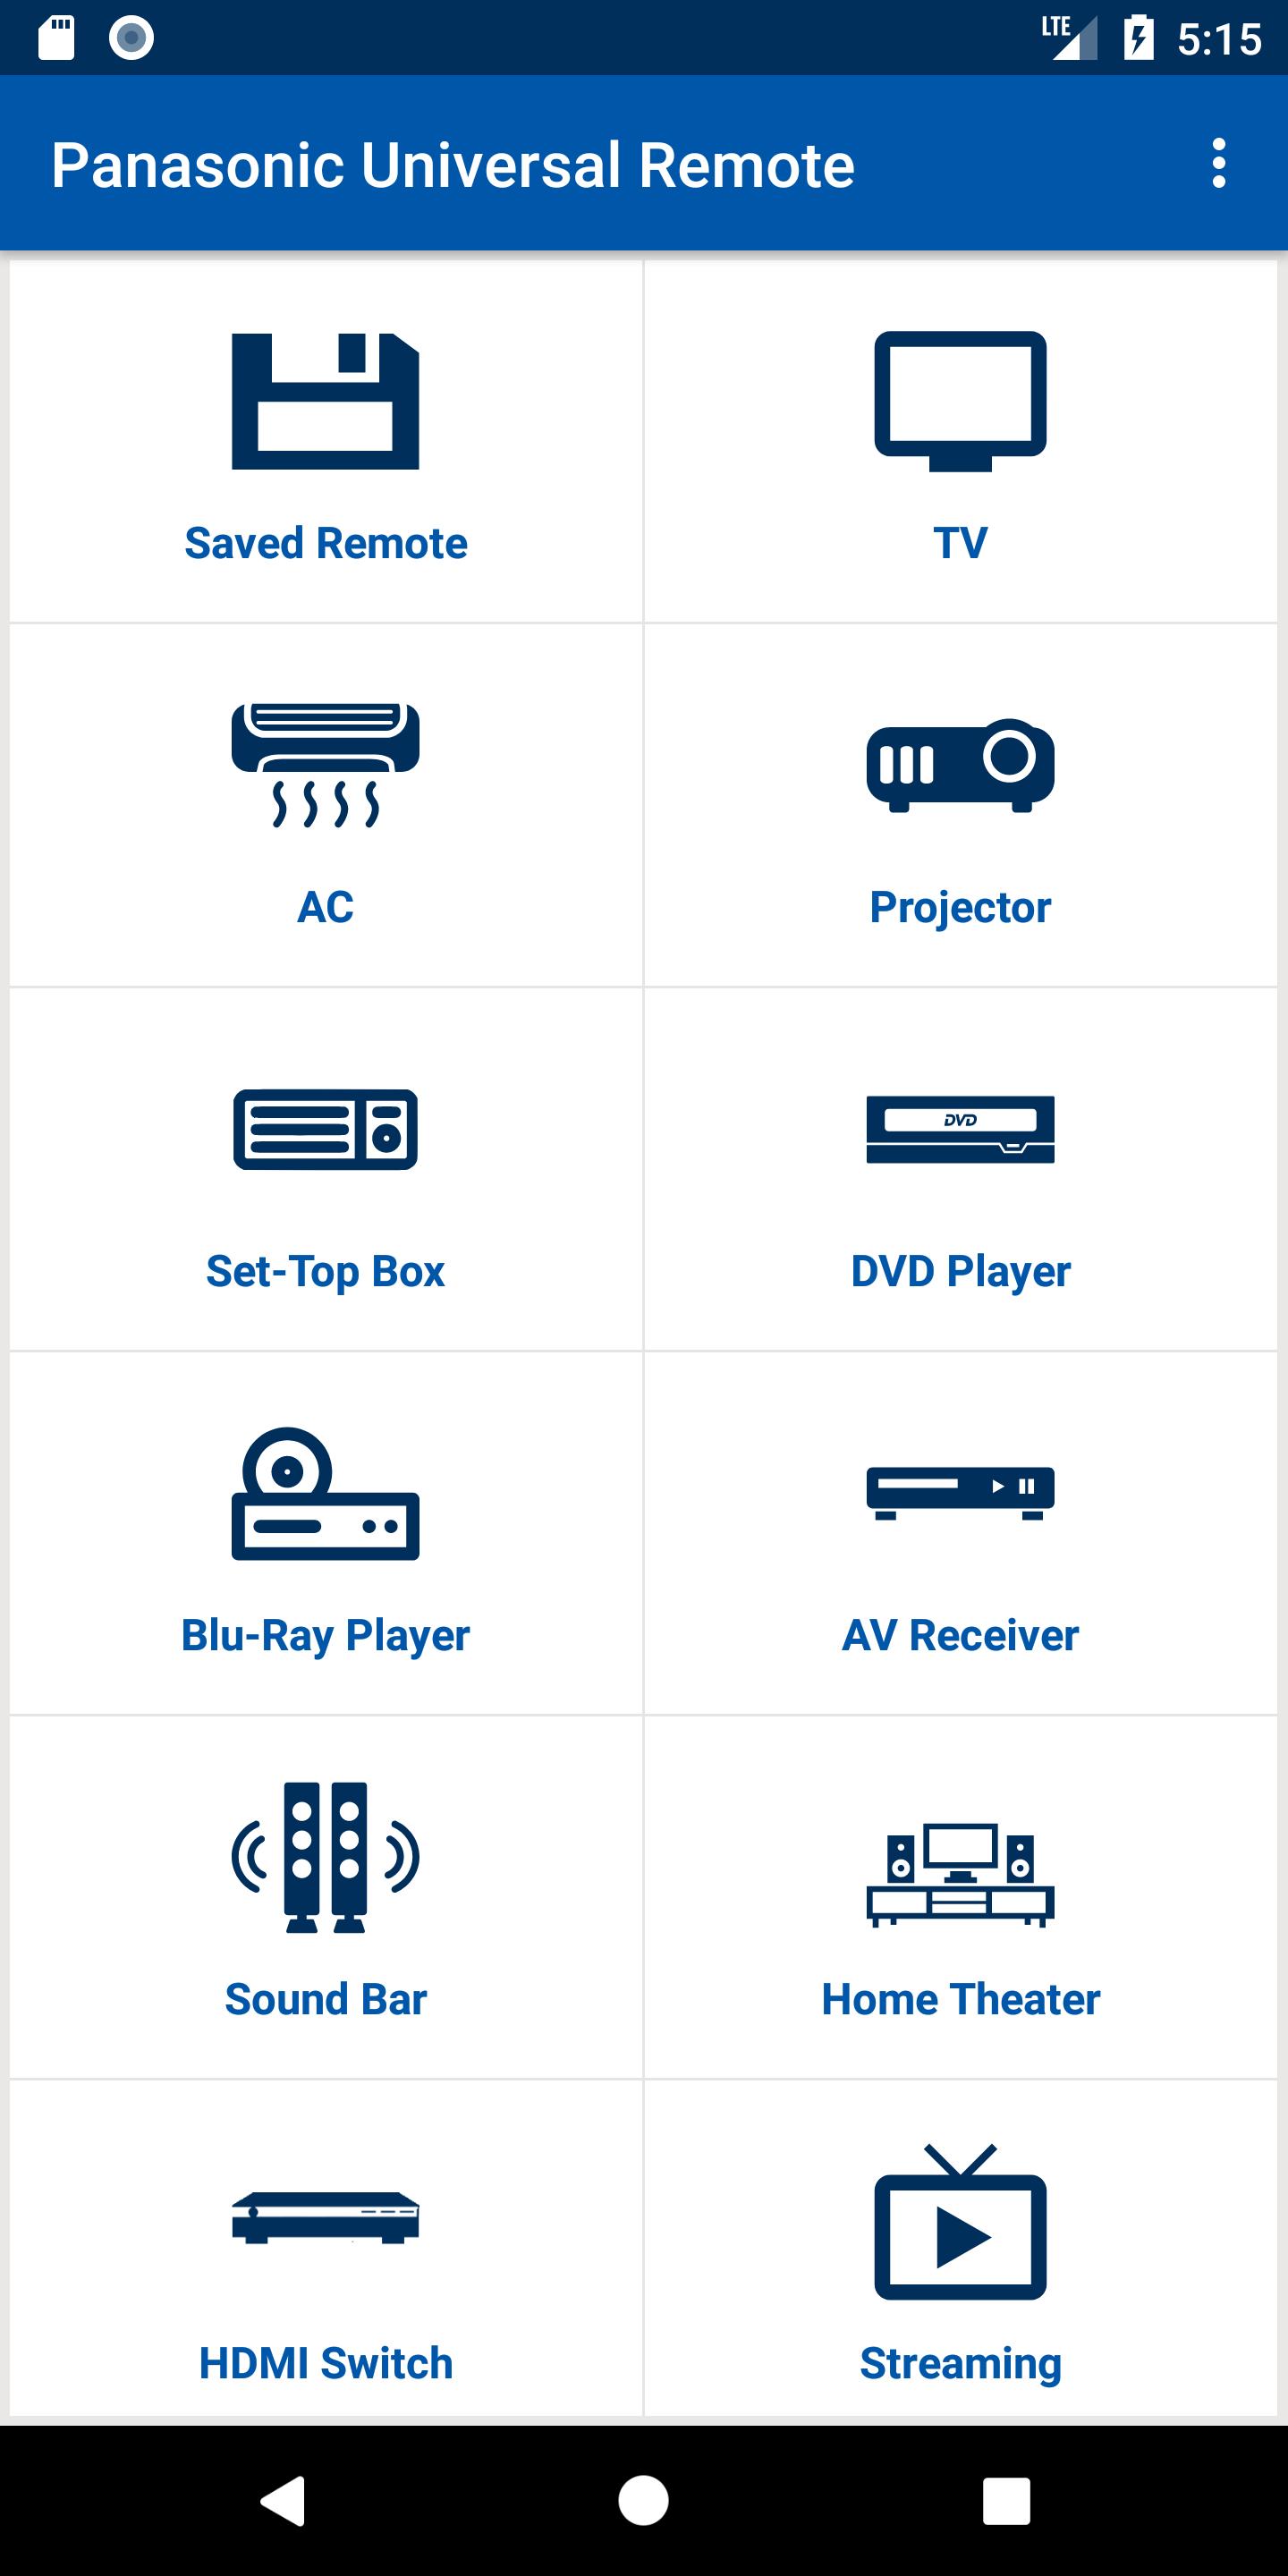 Panasonic Universal Remote for Android - APK Download